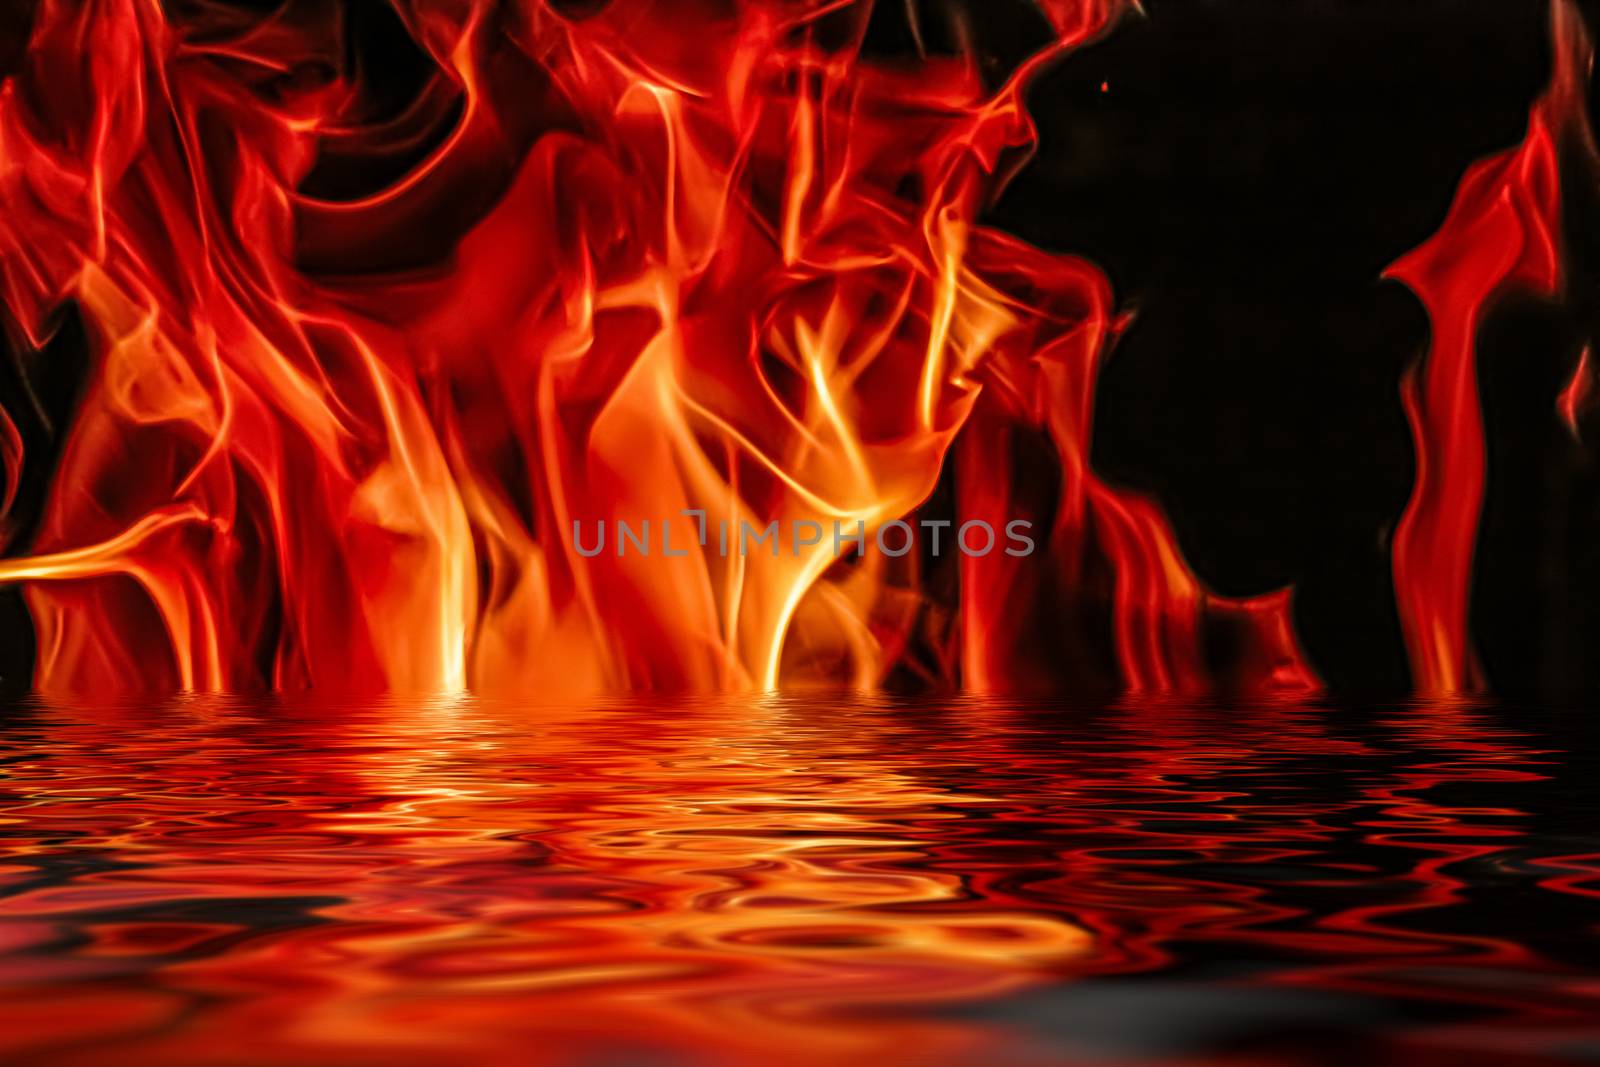 Hot fire flames in water as nature element and abstract backgrou by Anneleven